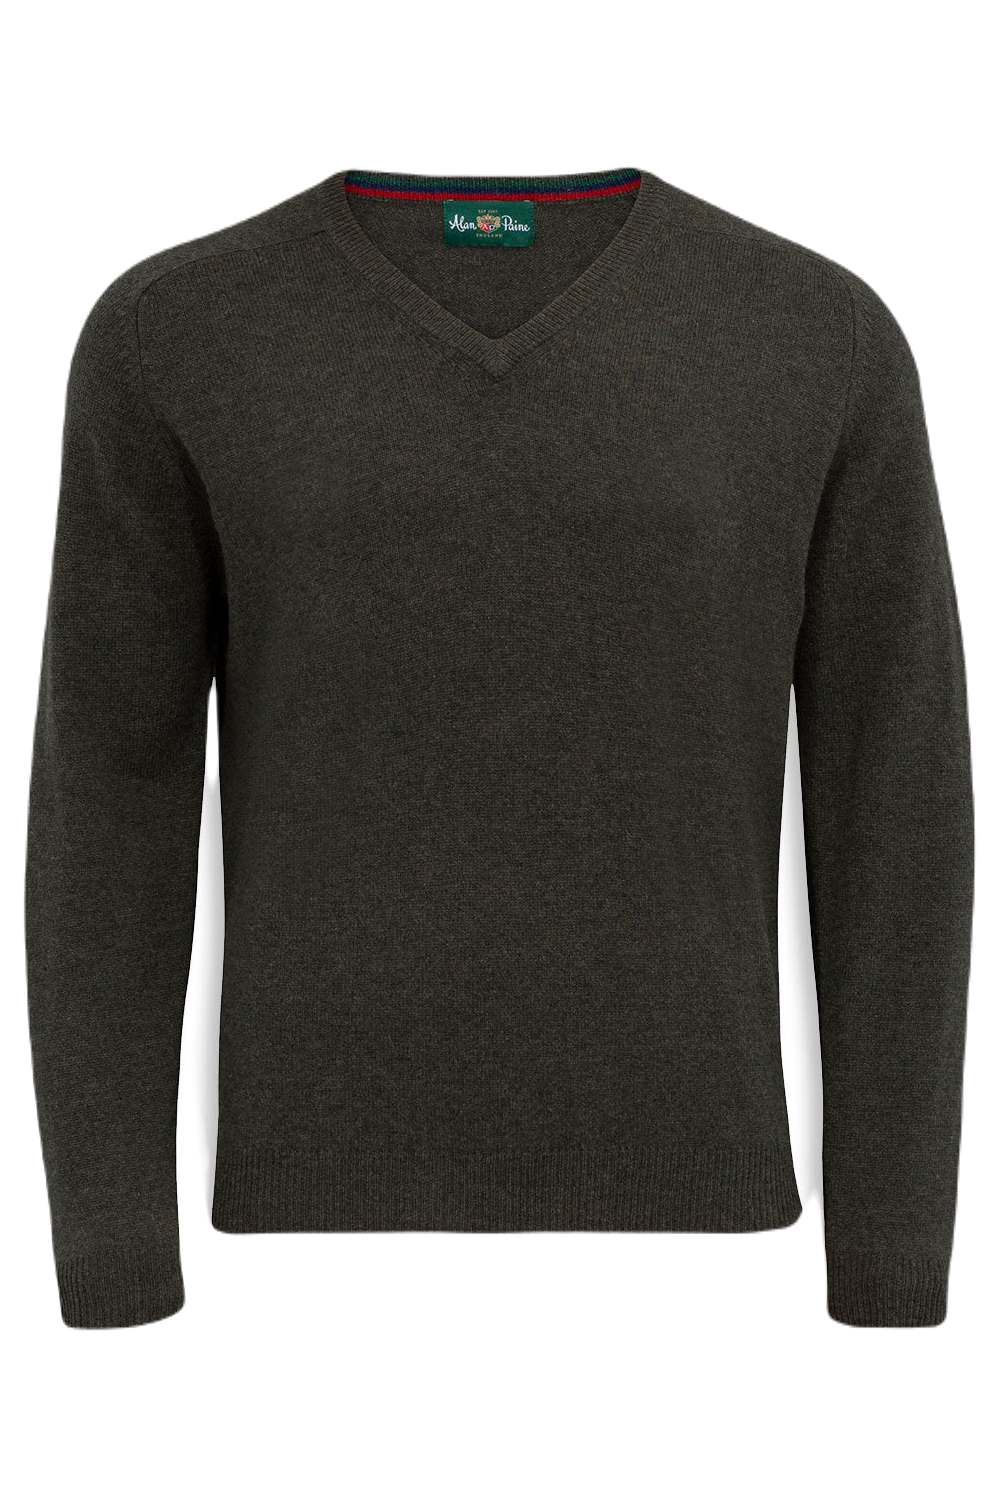 Alan Paine Streetly Lambswool V Neck Jumper in Seaweed 